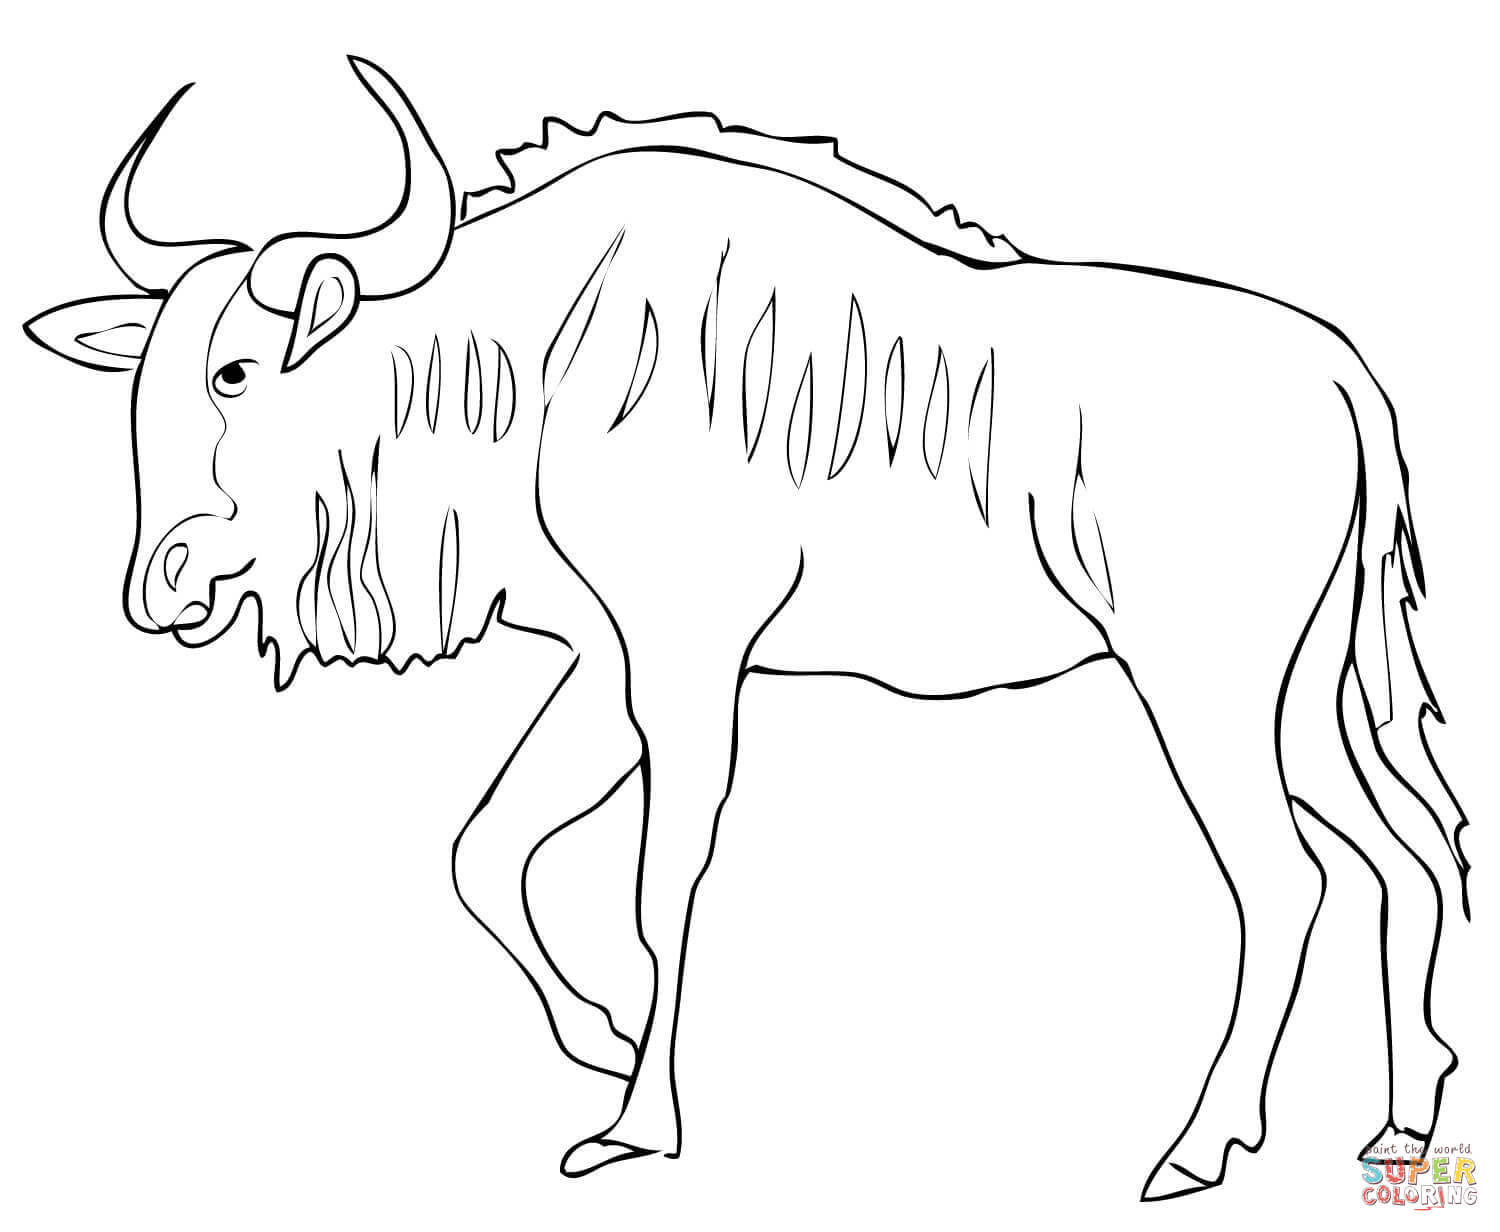 Gnu Antelope Blue Wildebeest coloring page | Free Printable Coloring Pages